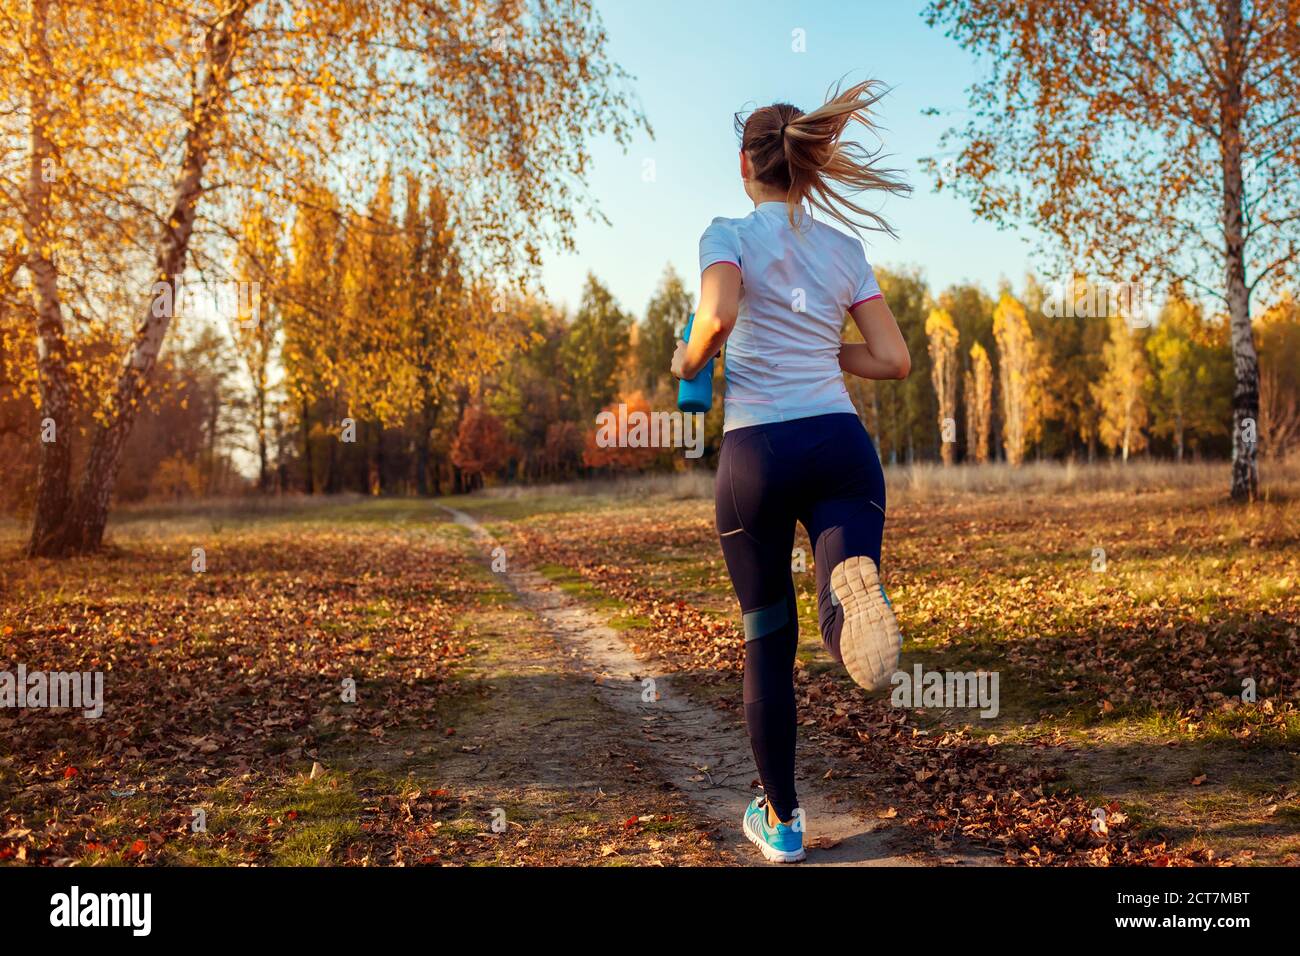 Runner training in autumn park. Young woman running at sunset in sportive clothes. Active lifestyle. Back view Stock Photo